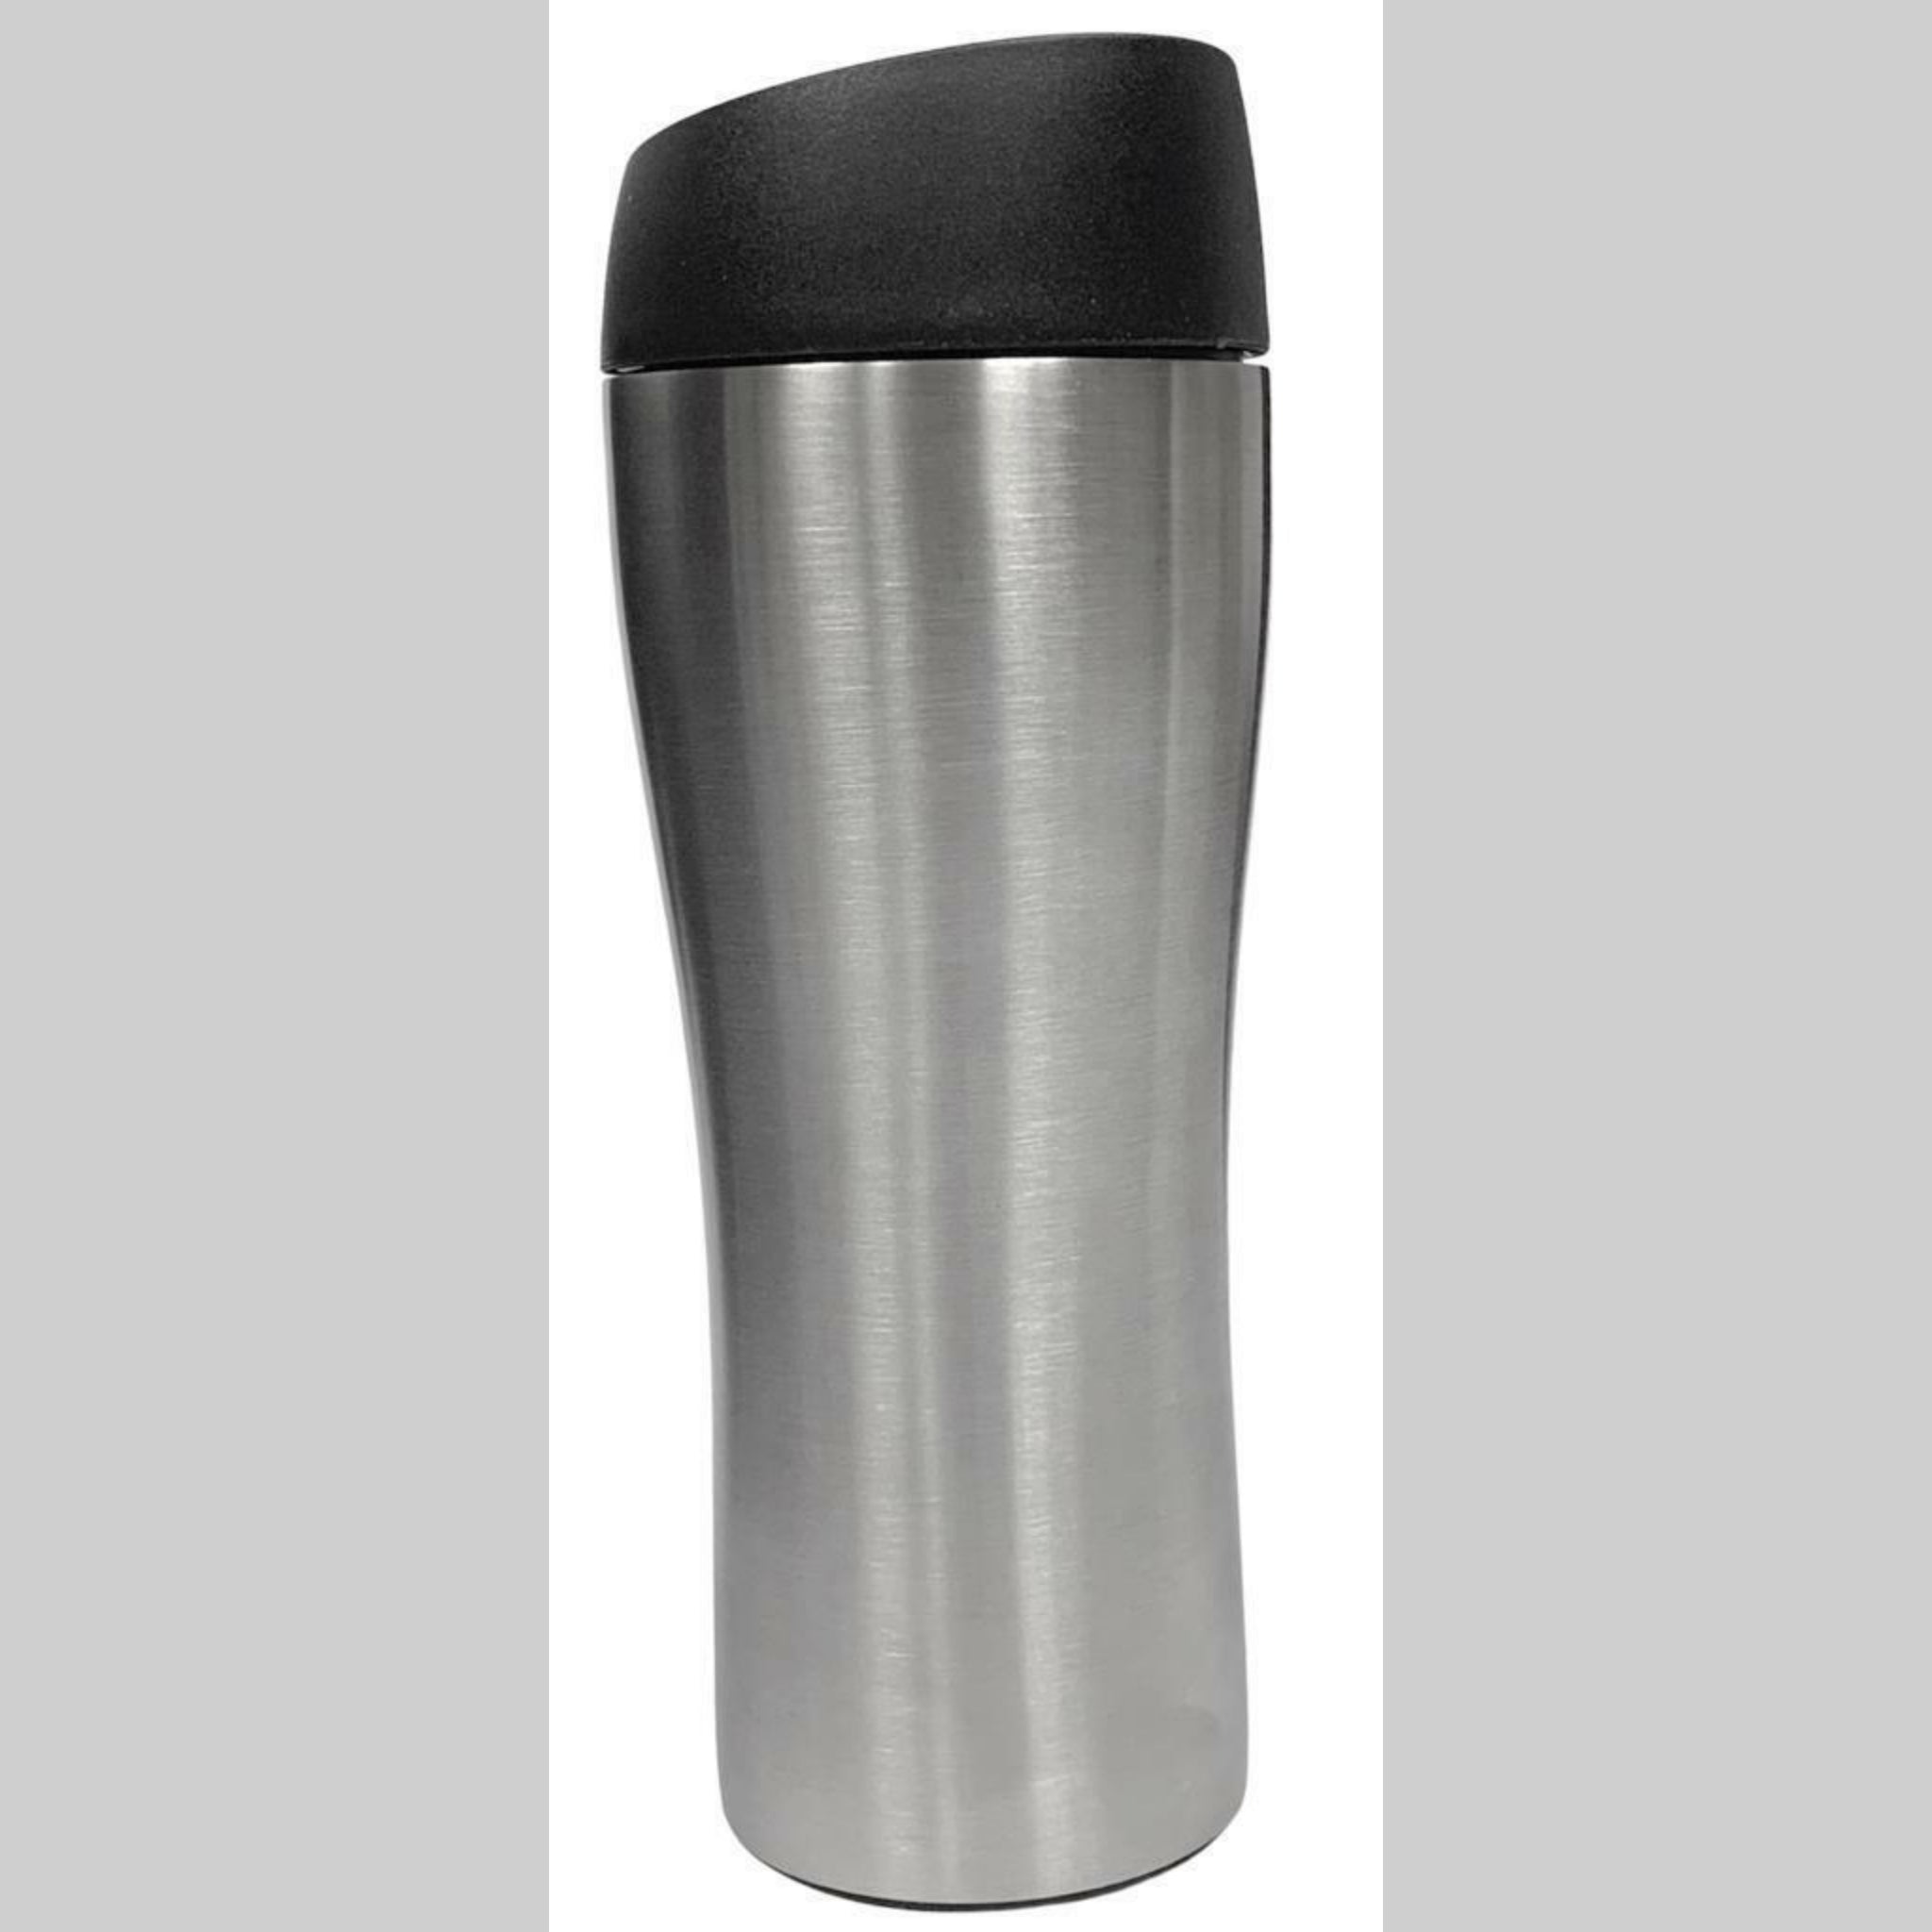 Beclen Harp AA Vaccum Insulated Travel Cup/Mug Tumbler With Push Lock Anti-Spill Lid-Your Perfect Travel Companion